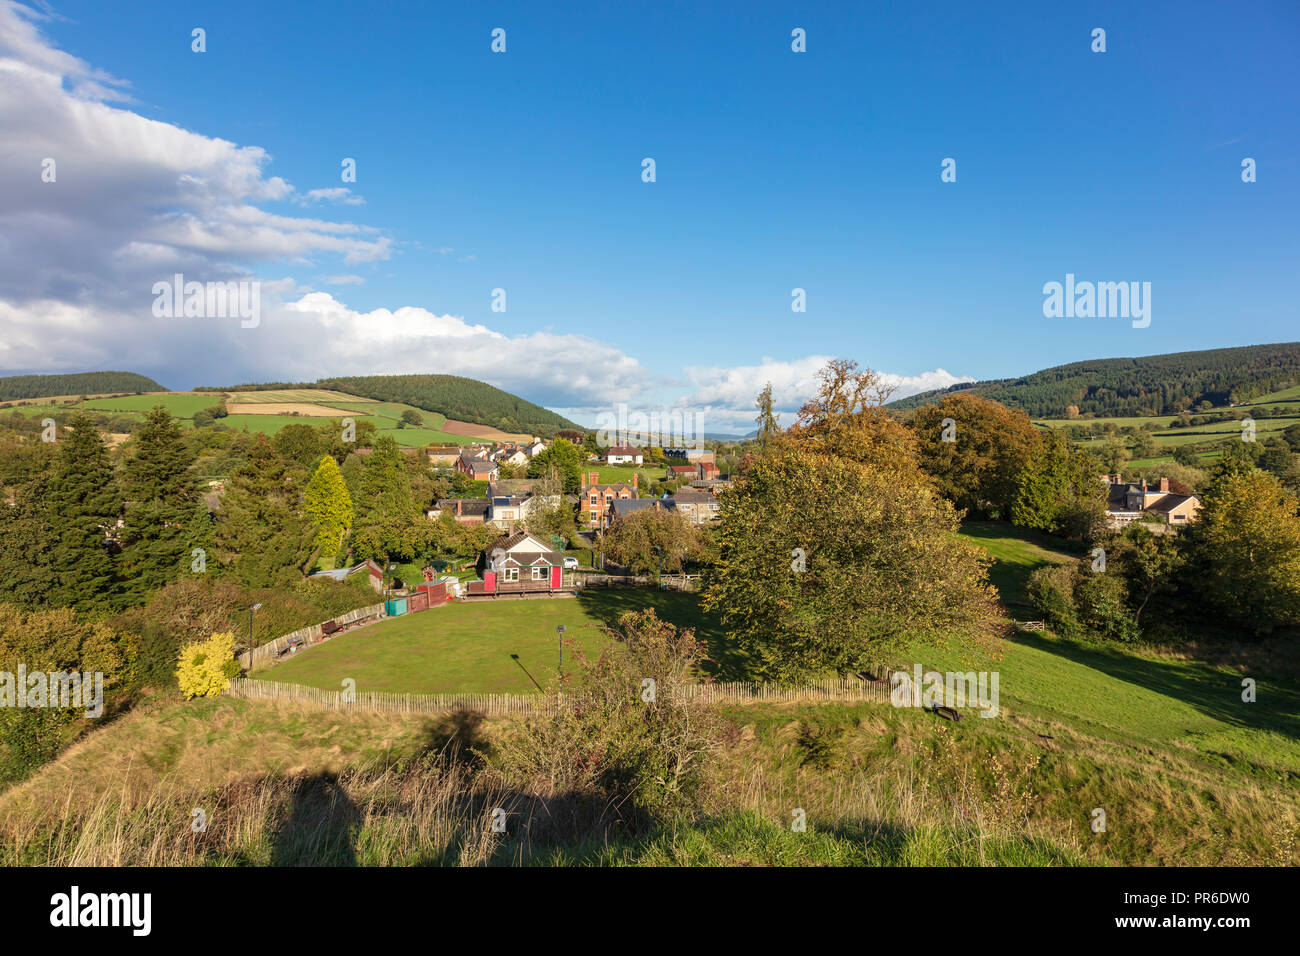 Clun village Bowling Club with wooden club house, on the outskirts of the pretty village, with distant hill views, Clun, Shropshire, UK Stock Photo